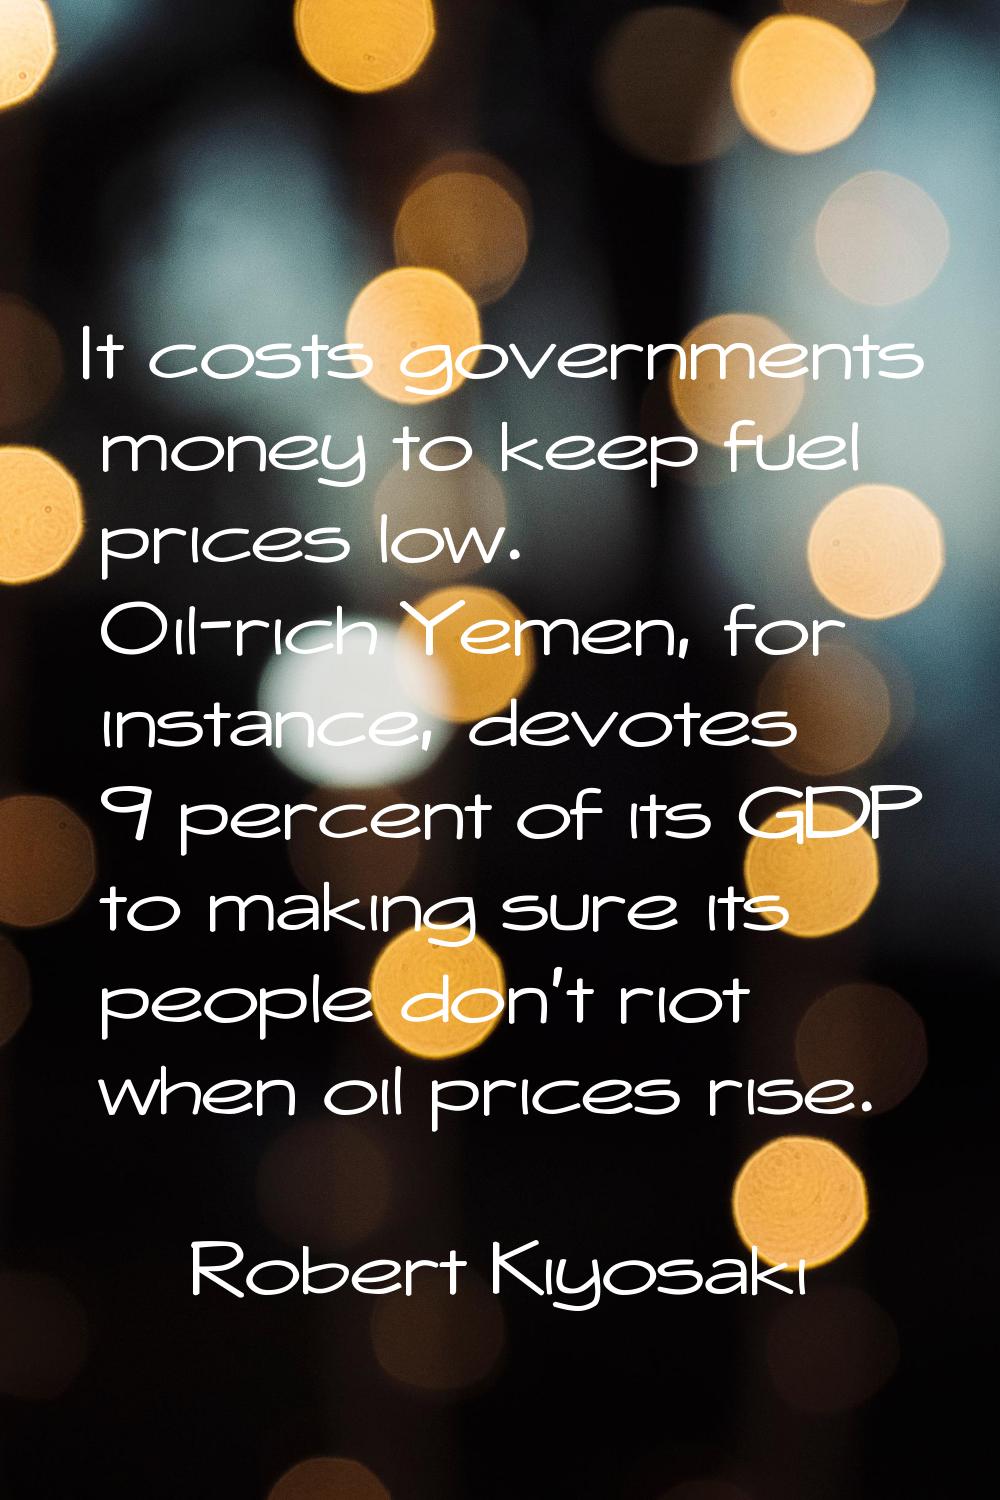 It costs governments money to keep fuel prices low. Oil-rich Yemen, for instance, devotes 9 percent